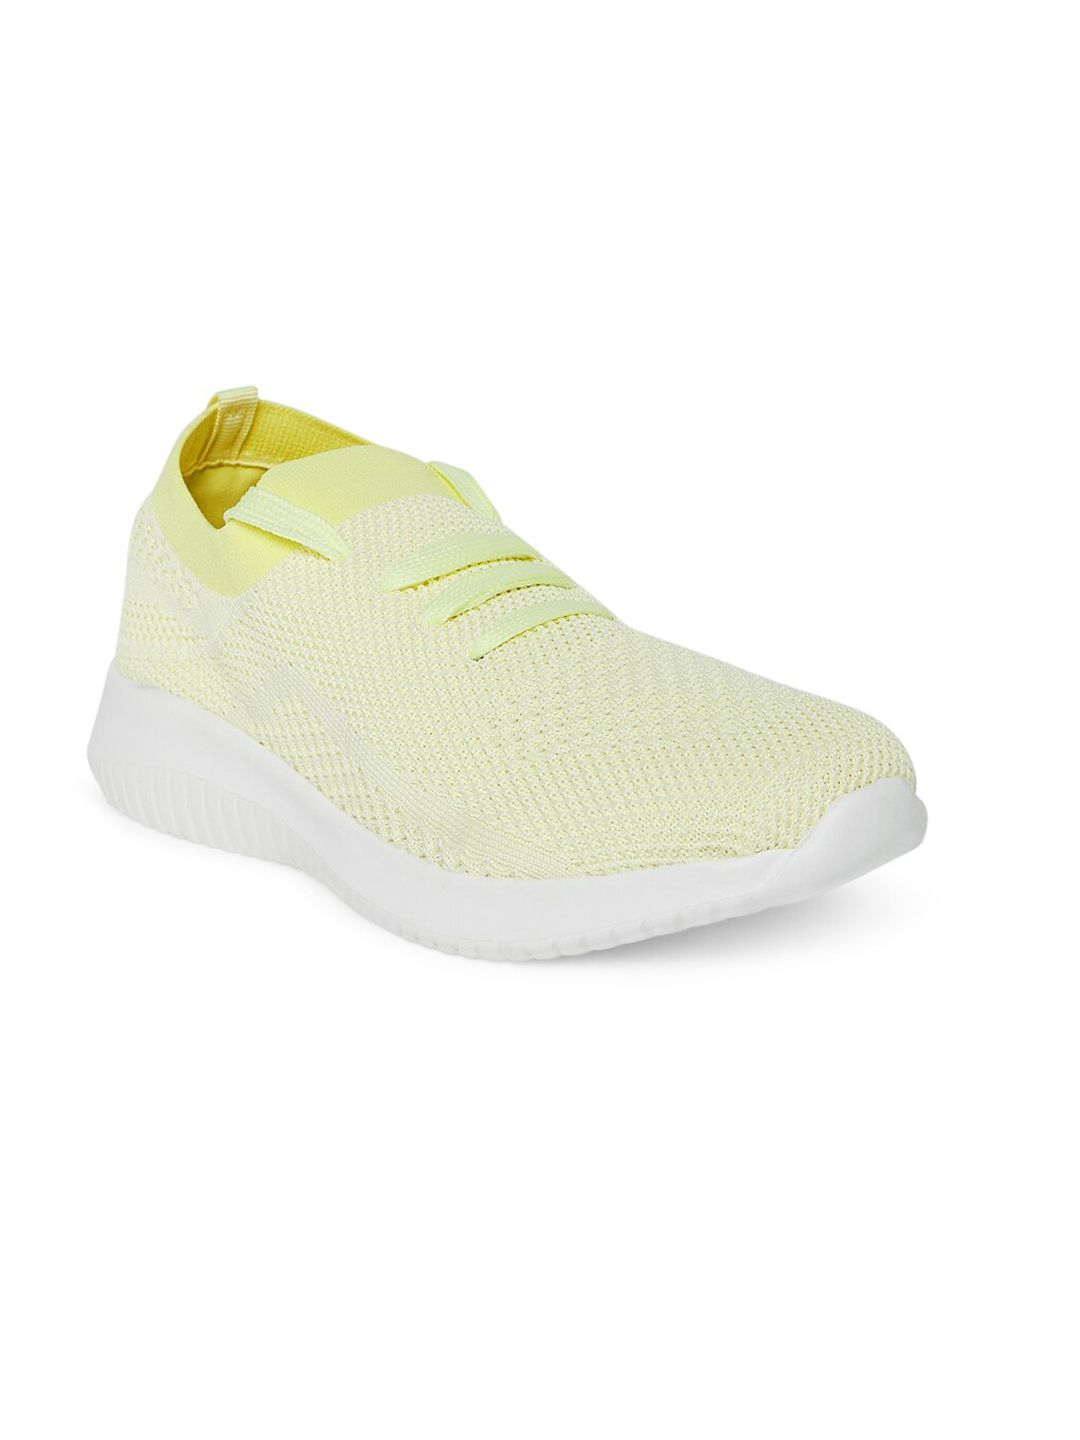 Forever Glam by Pantaloons Women Yellow Textile Running Non-Marking Shoes Price in India